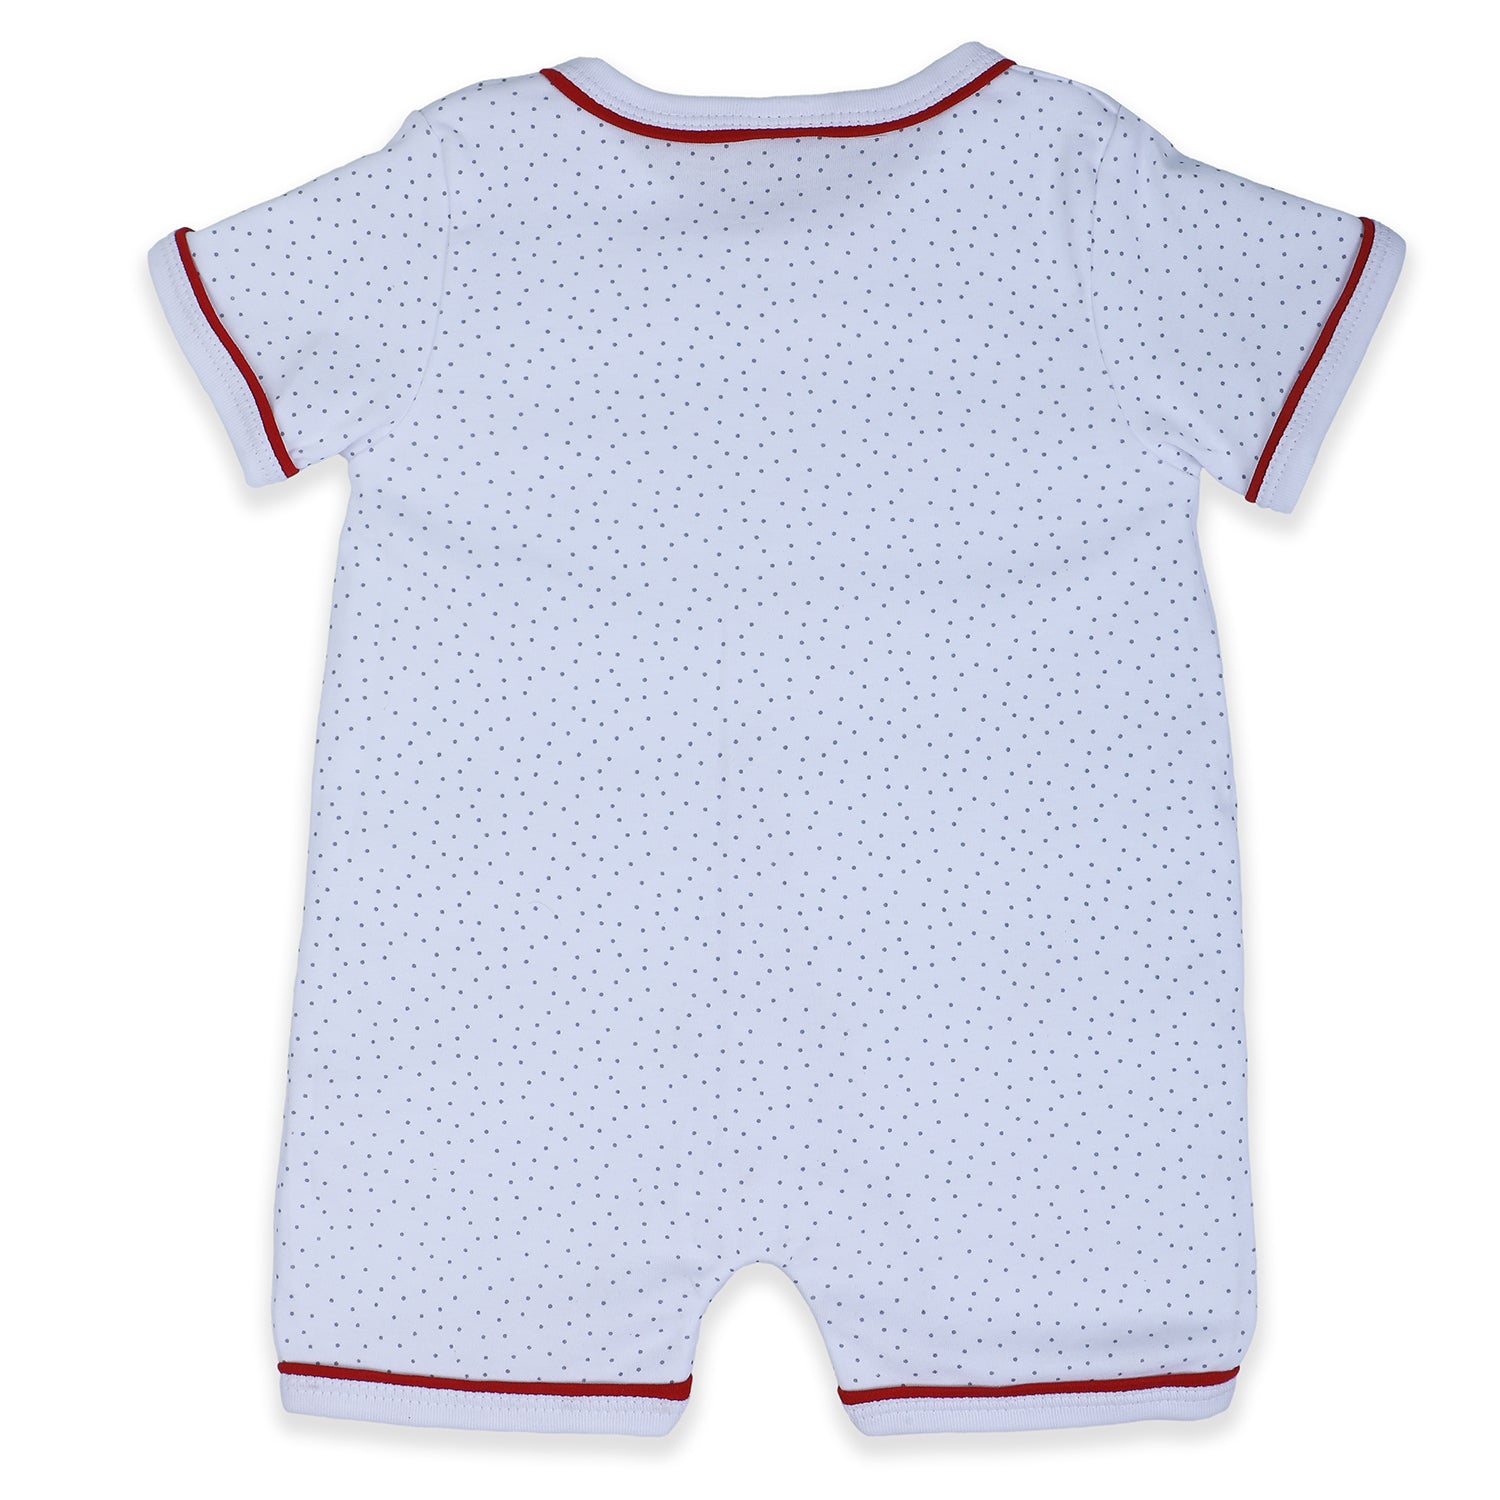 Baby Moo Star Teddy Embroidered Soft Cotton Short Romper - White - Baby Moo